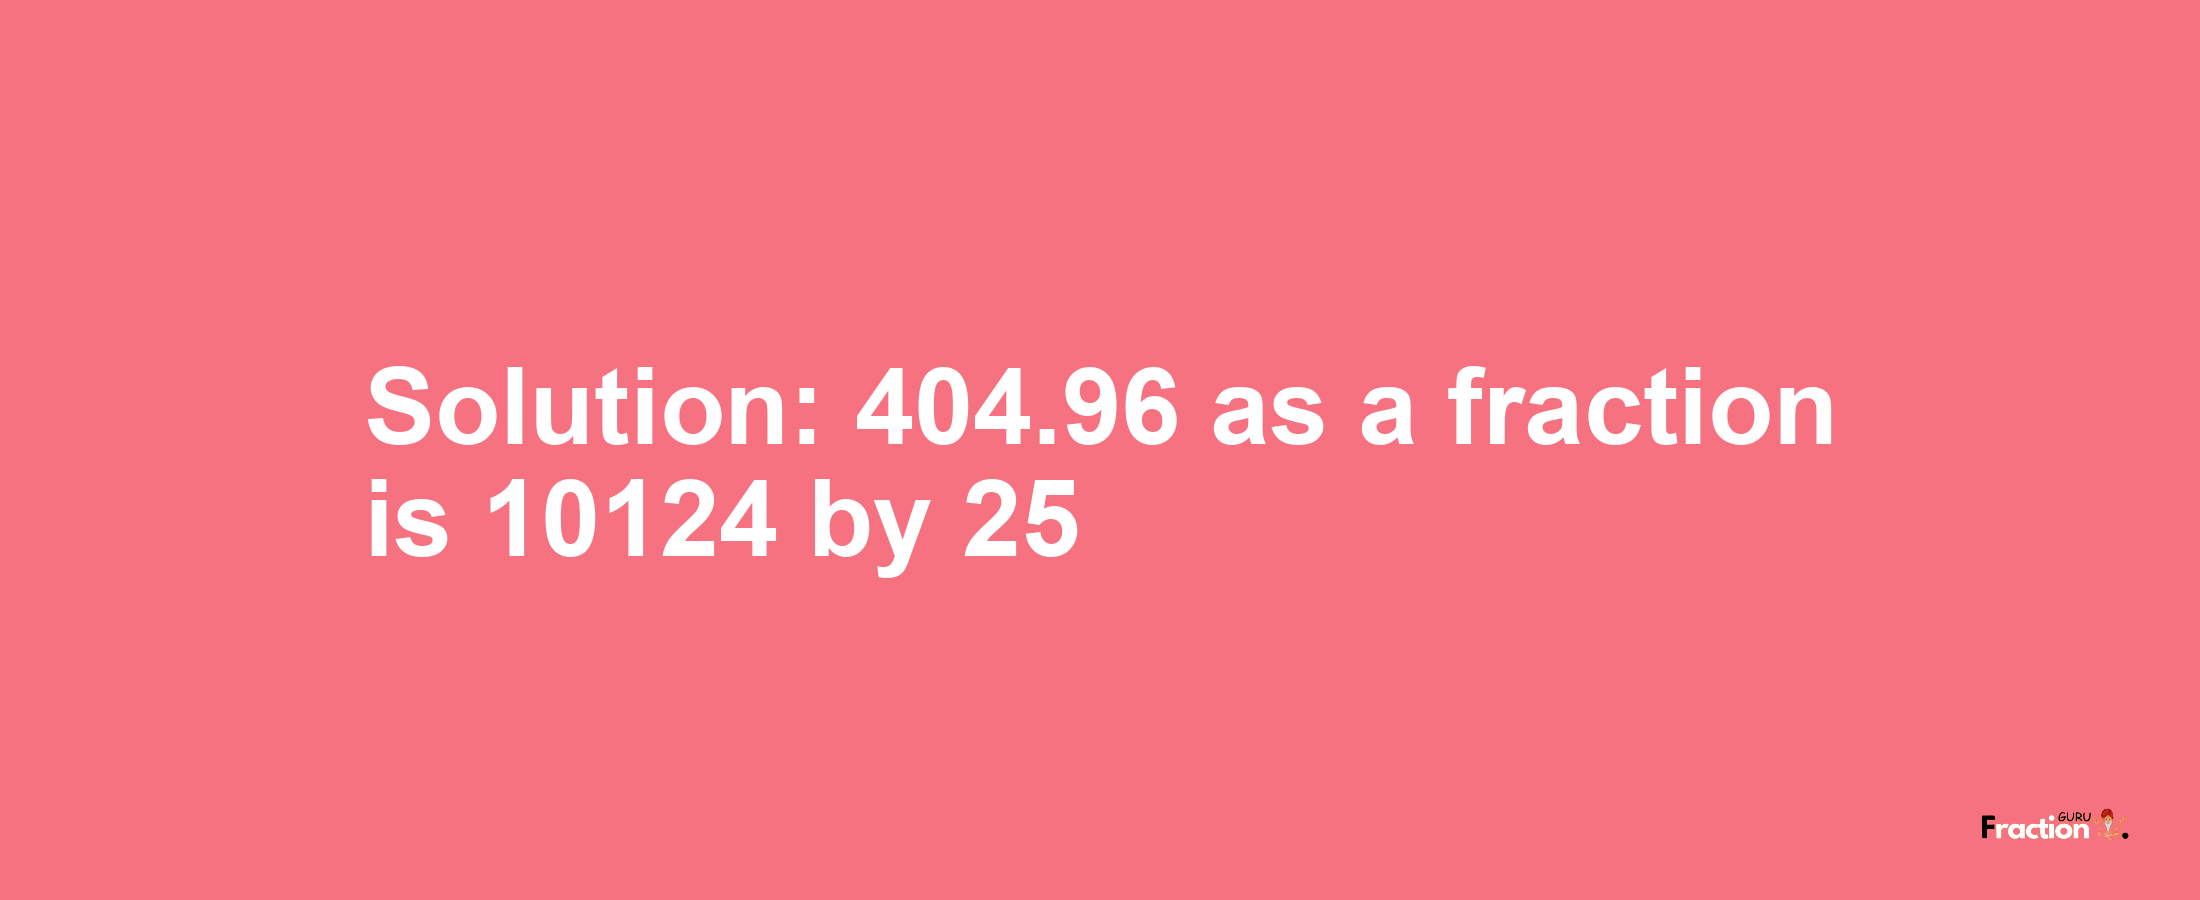 Solution:404.96 as a fraction is 10124/25